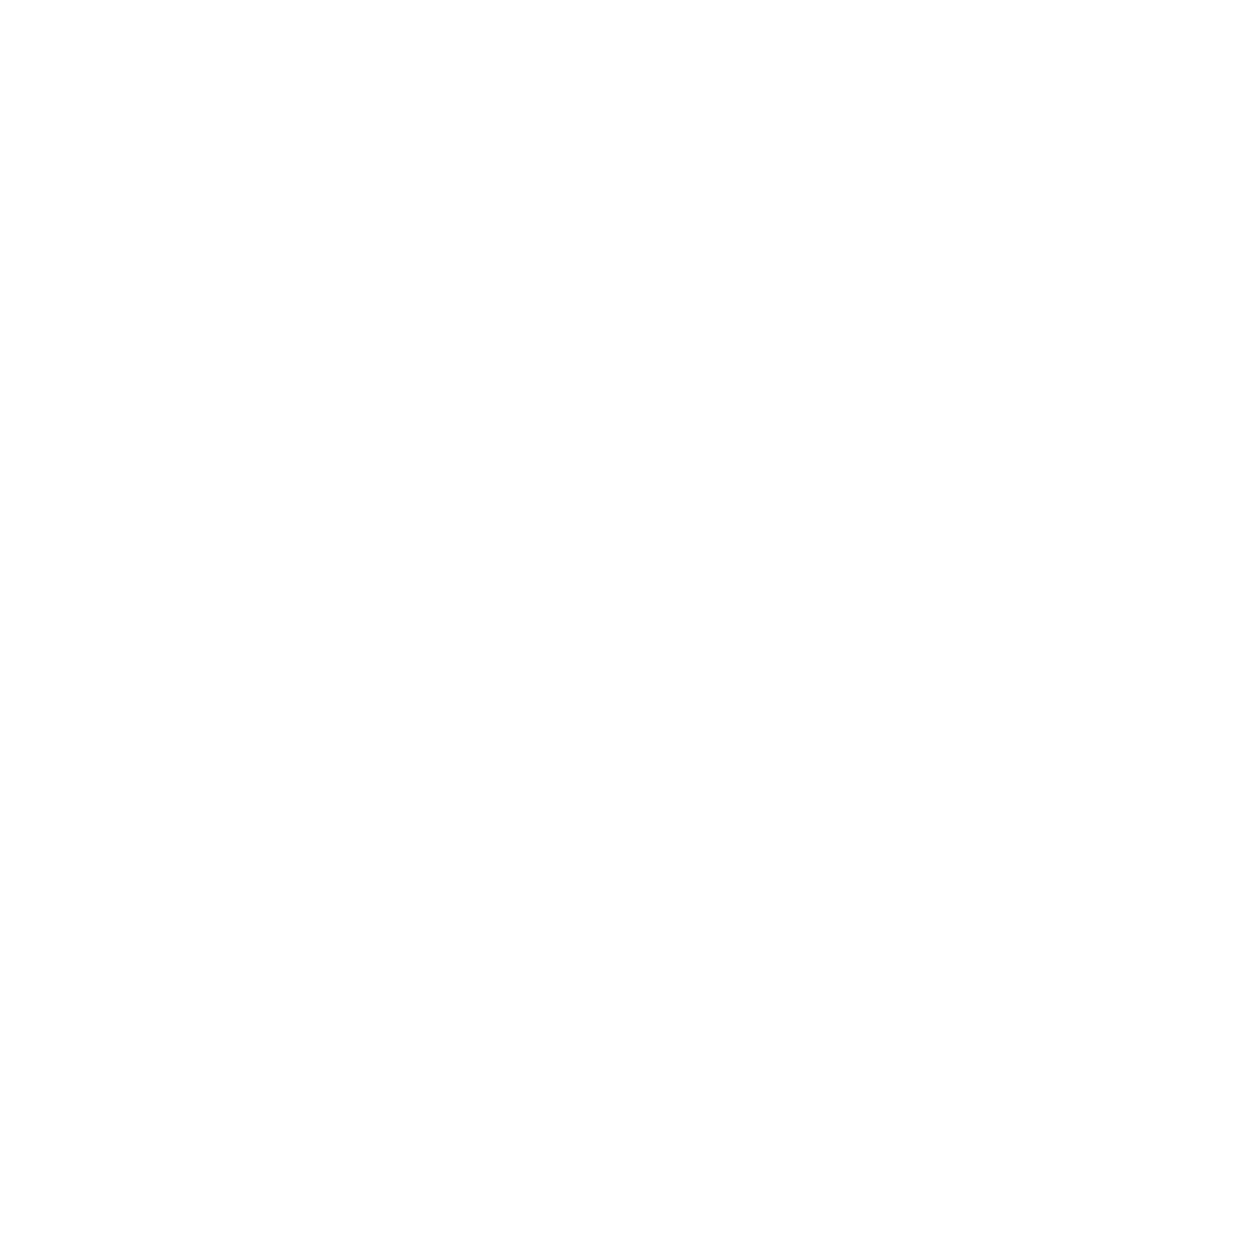 Supplies icon at Apple Self Storage - Port Carling in Port Carling, Ontario